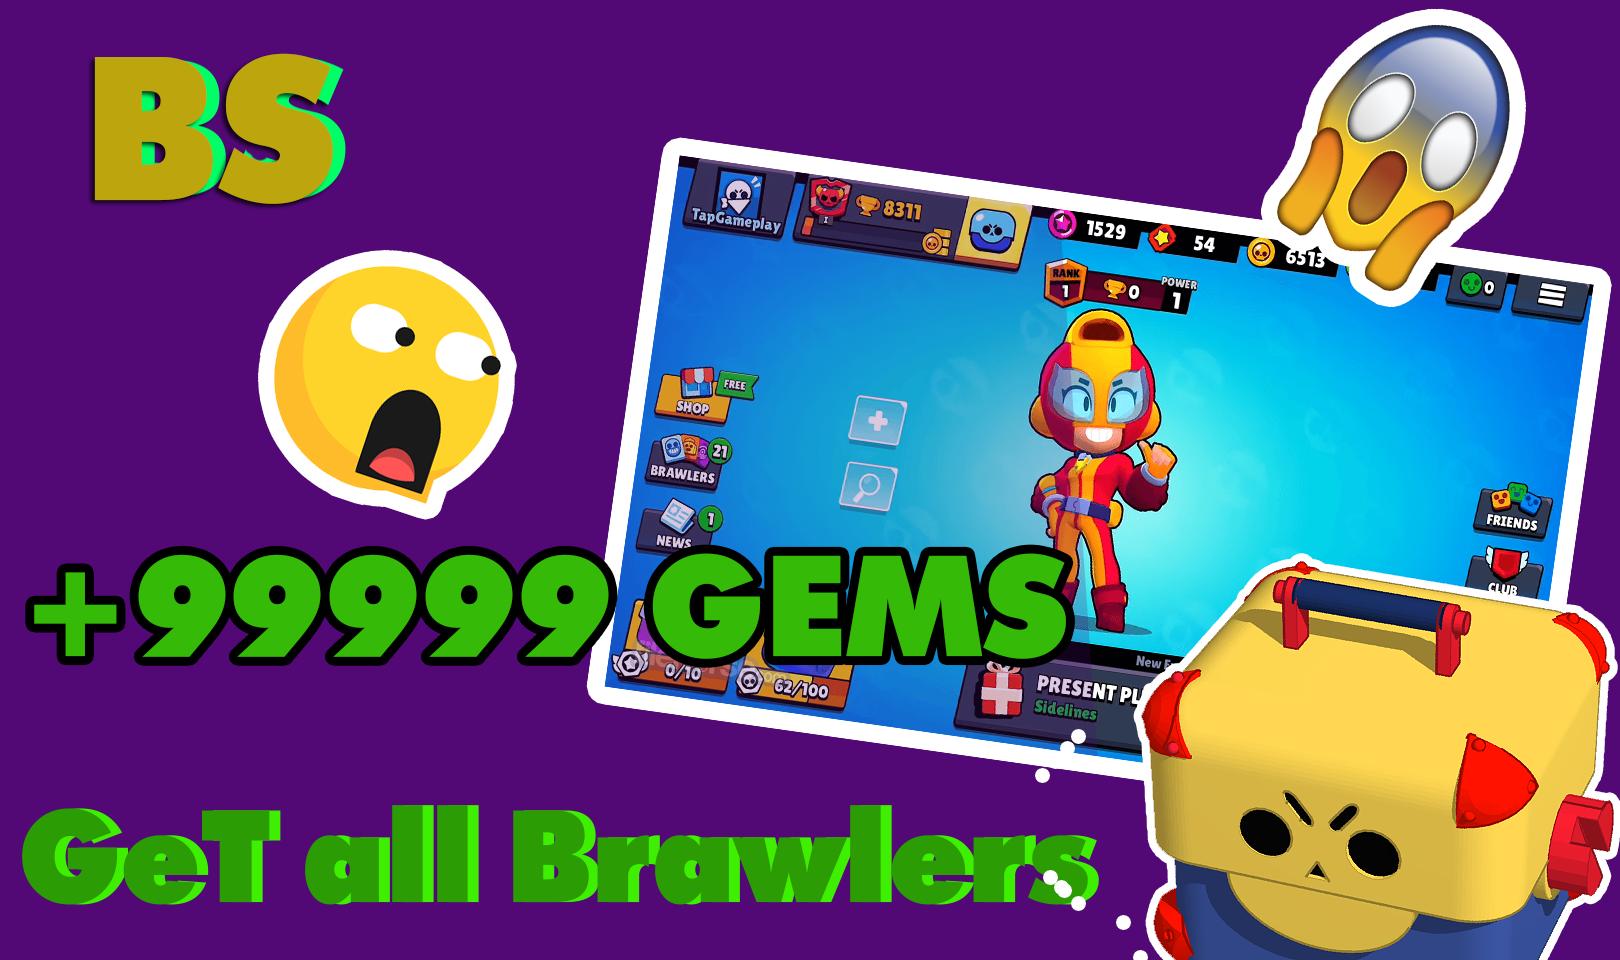 Box Simulator For Brawl Stars Win Heroes And Gems For Android Apk Download - leon in a chest brawl stars